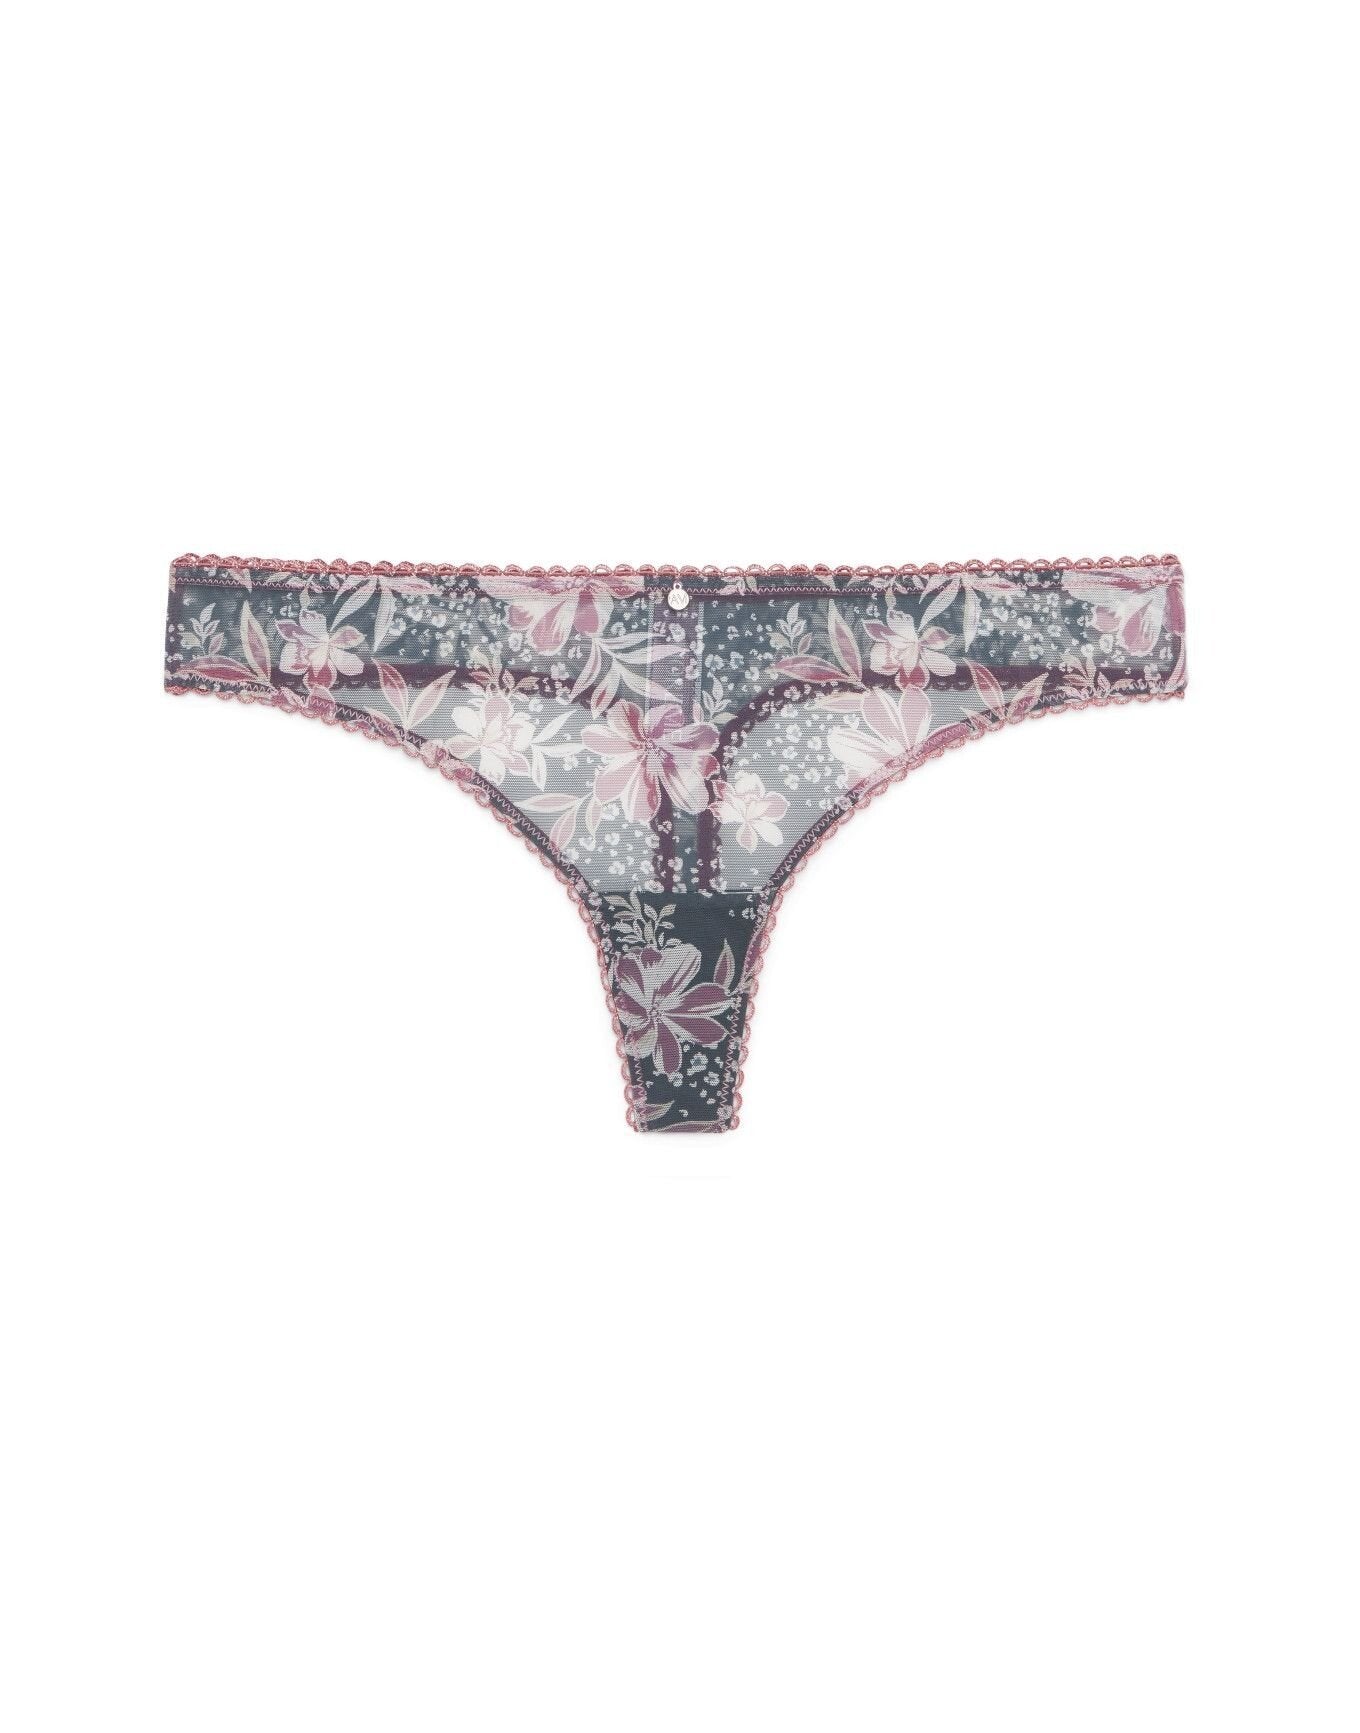 Adore Me Malina Thong in color Baskin' Flowers C01 and shape thong